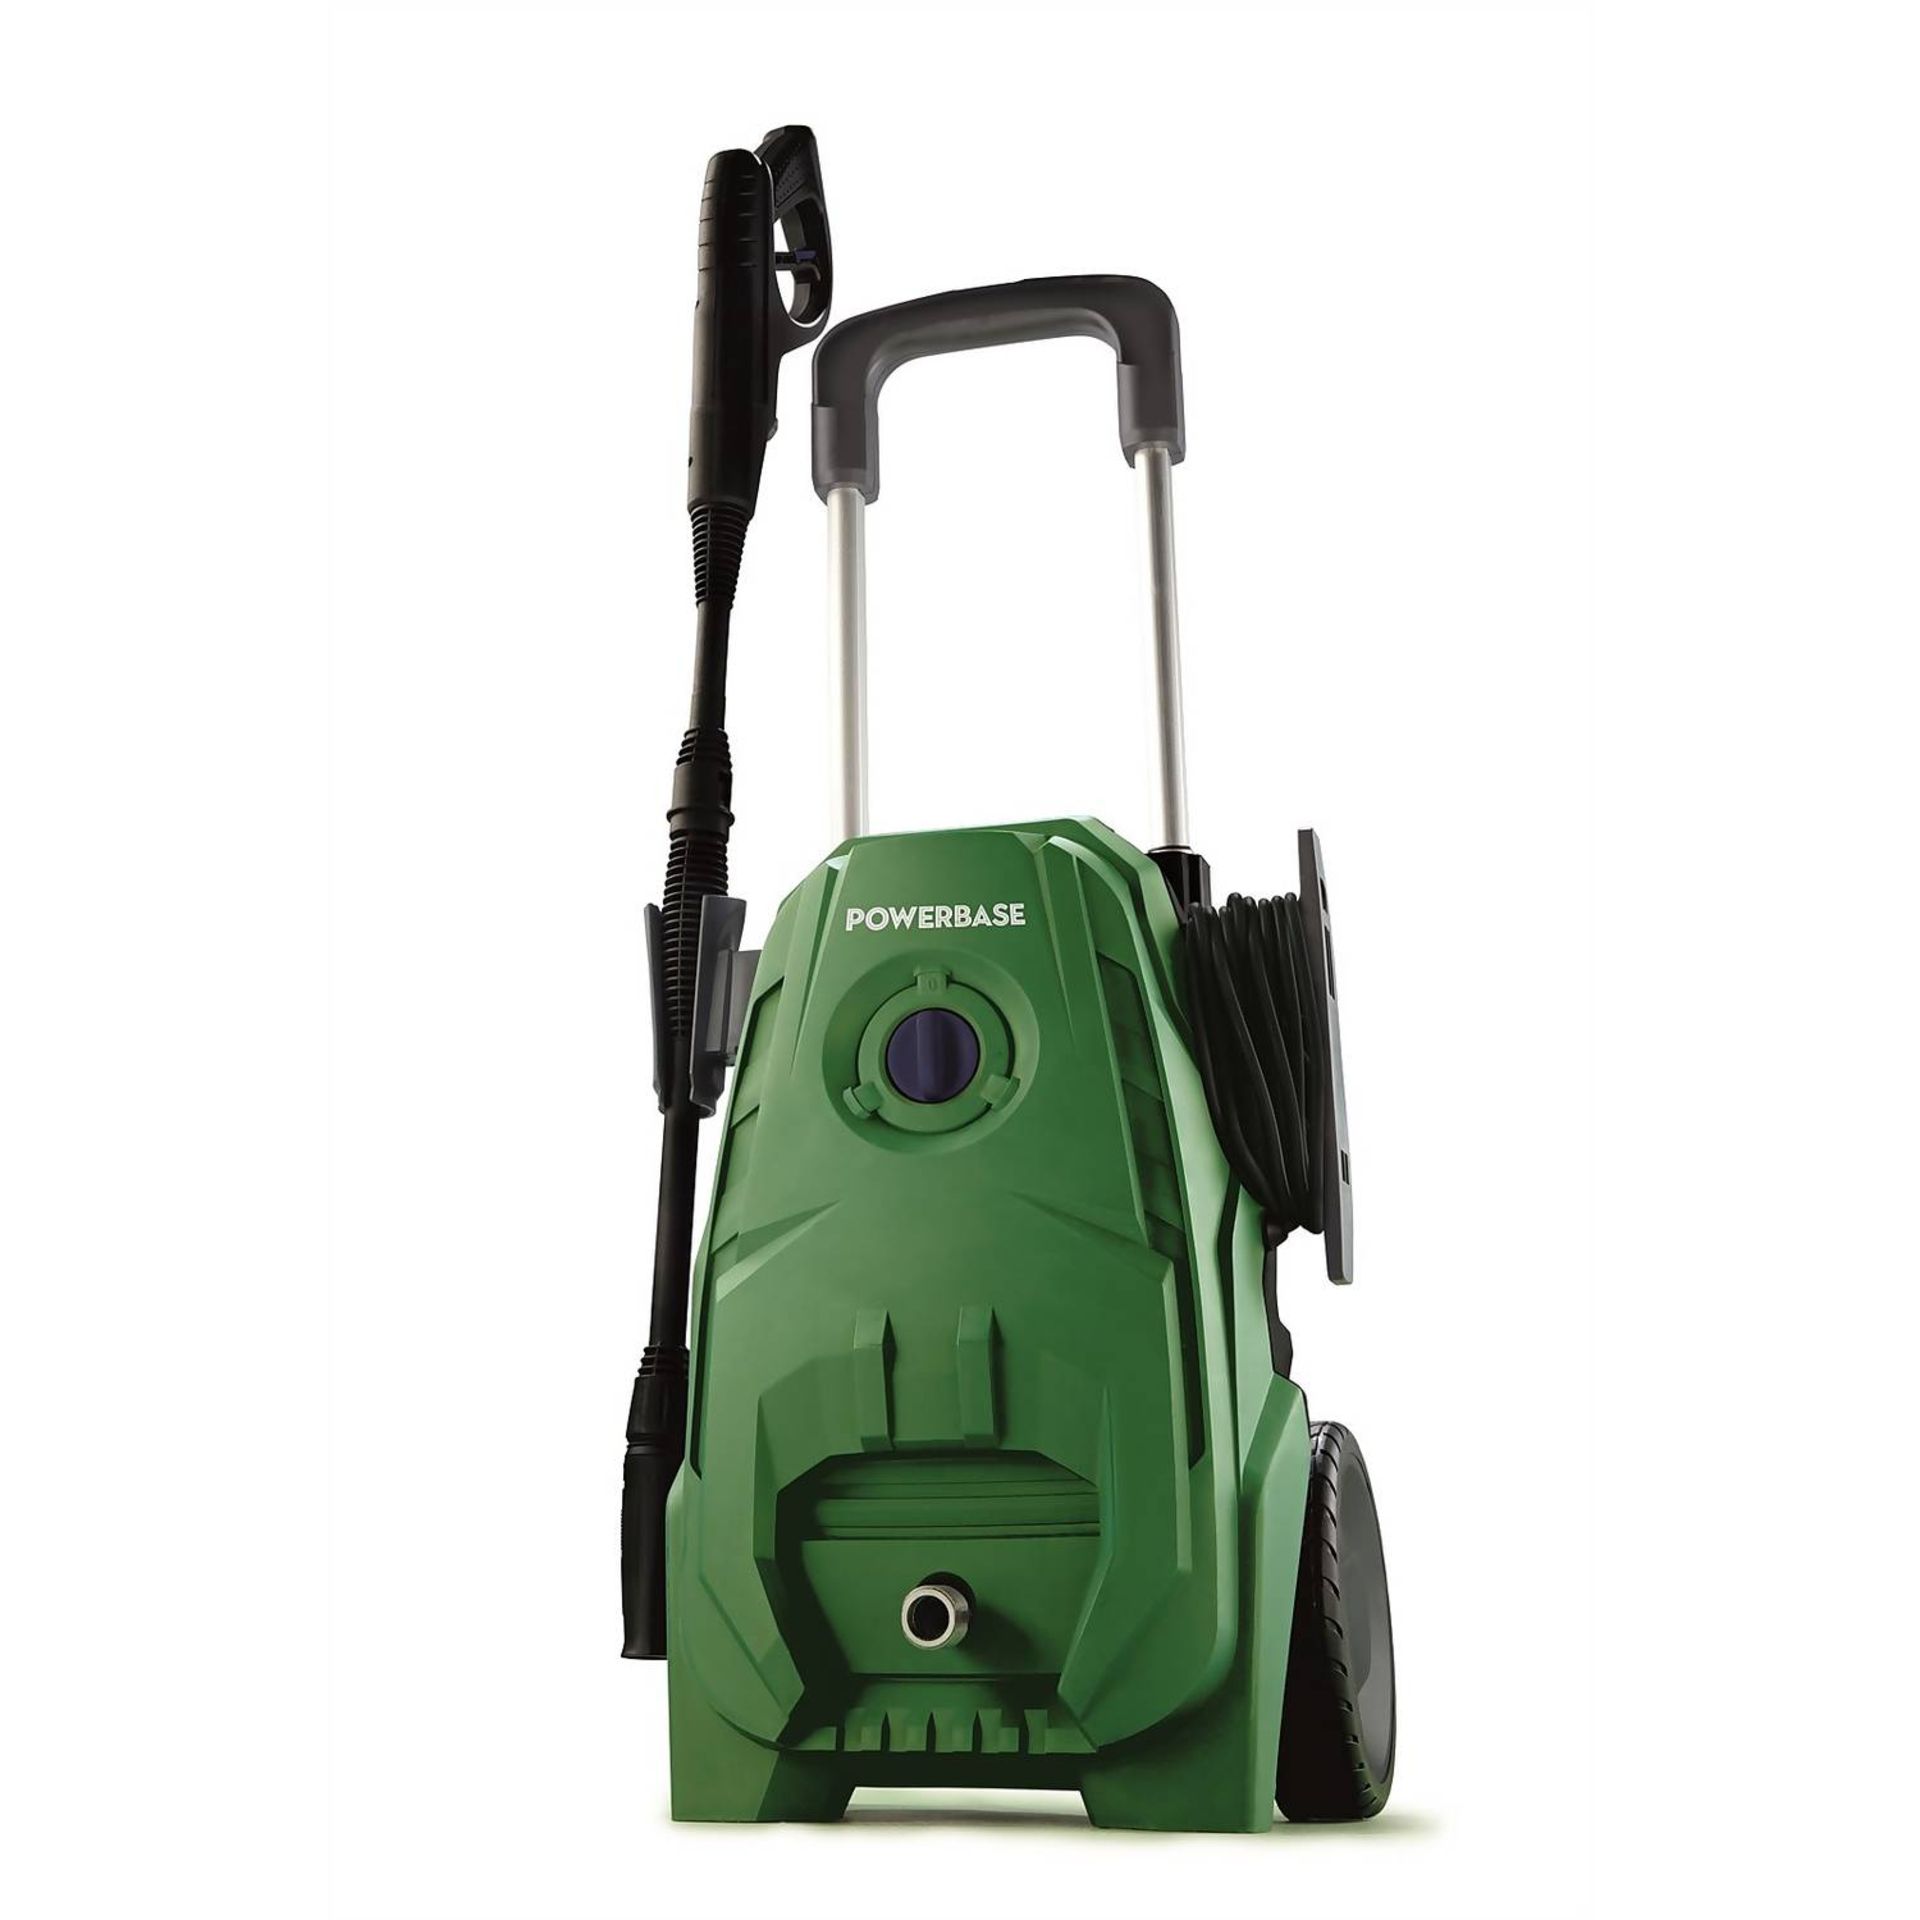 (R14A) 1x Powerbase 1850W Electric Pressure Washer RRP £99.